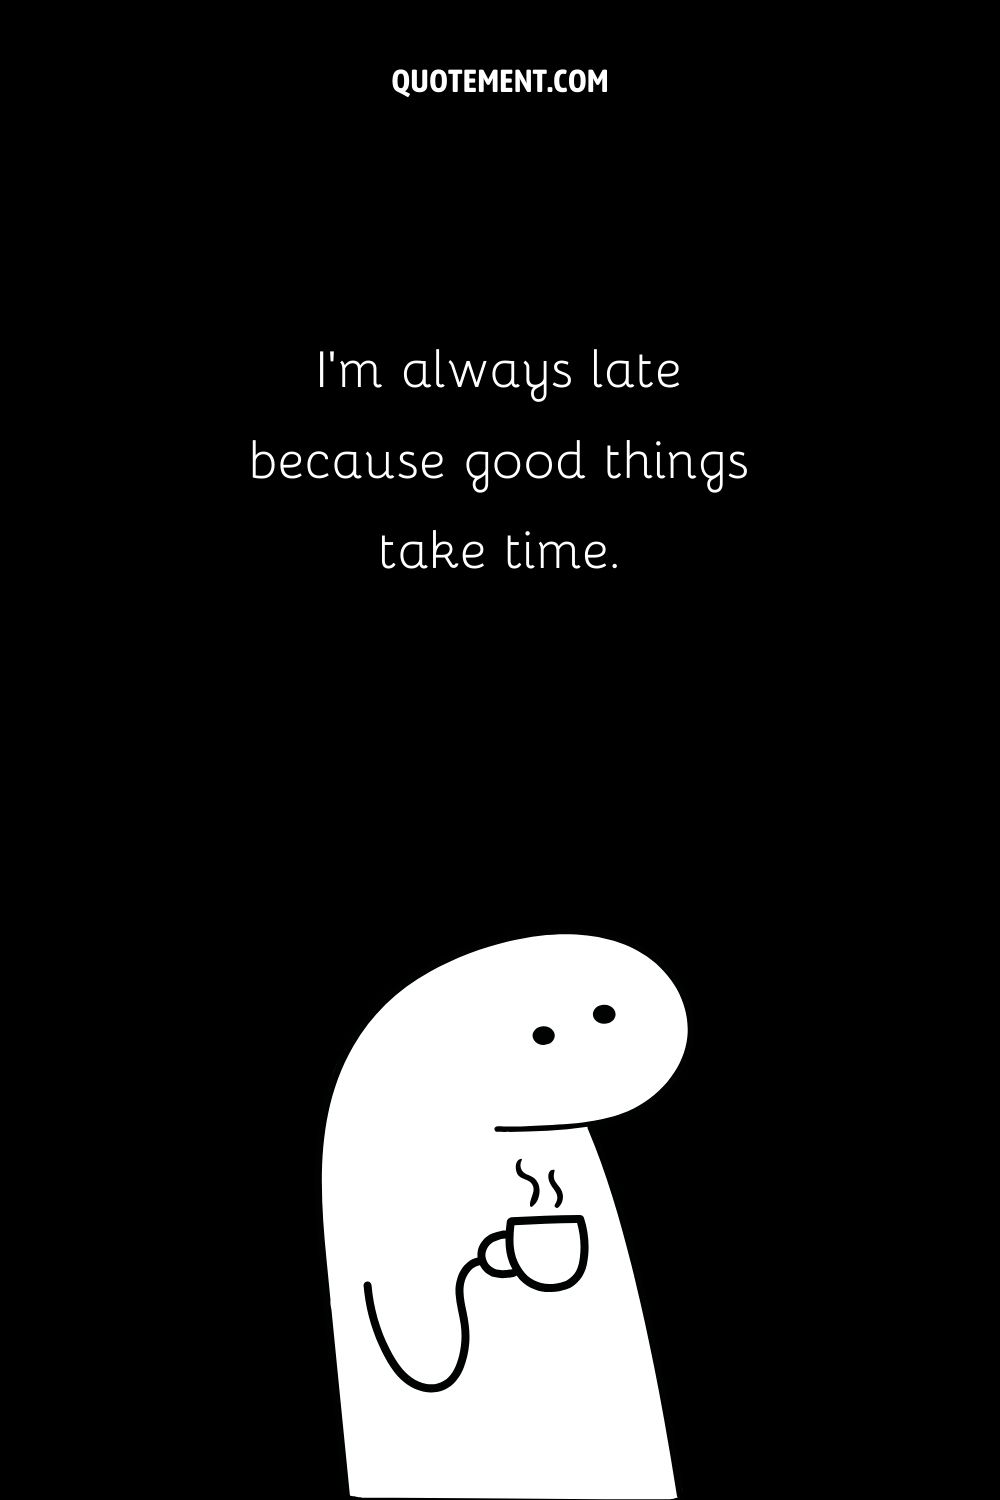 I’m always late because good things take time.